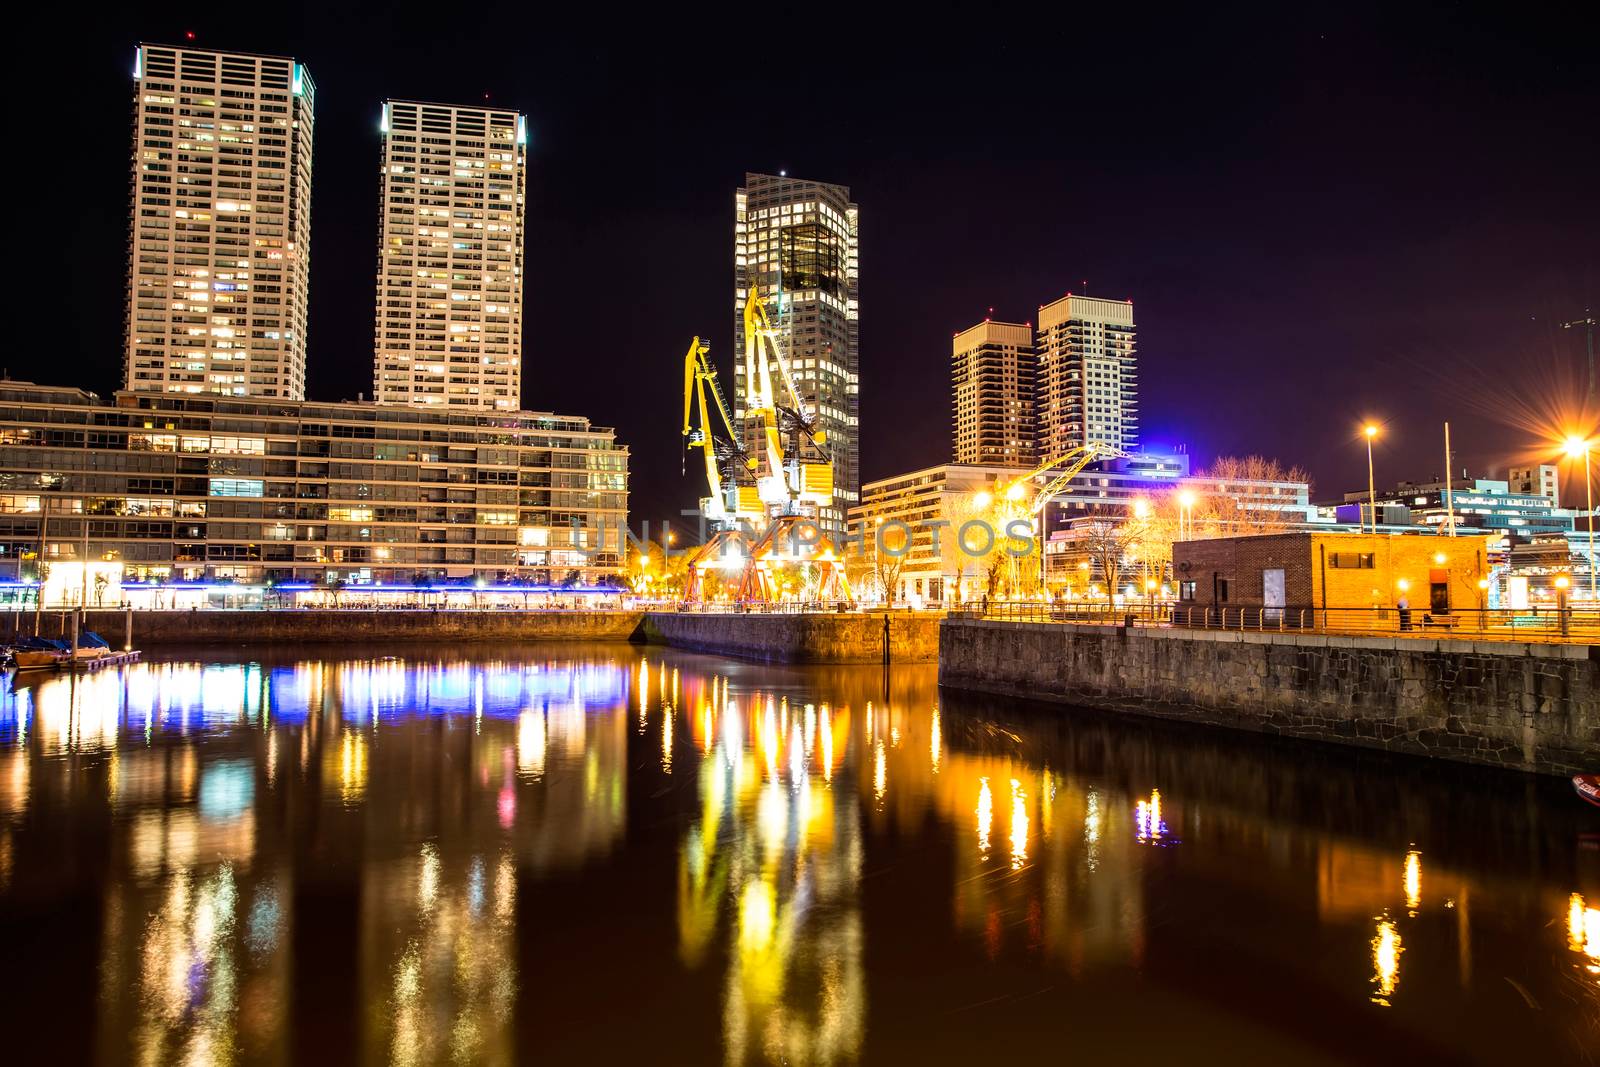 Puerto Madero in Buenos Aires at night		 by Spectral